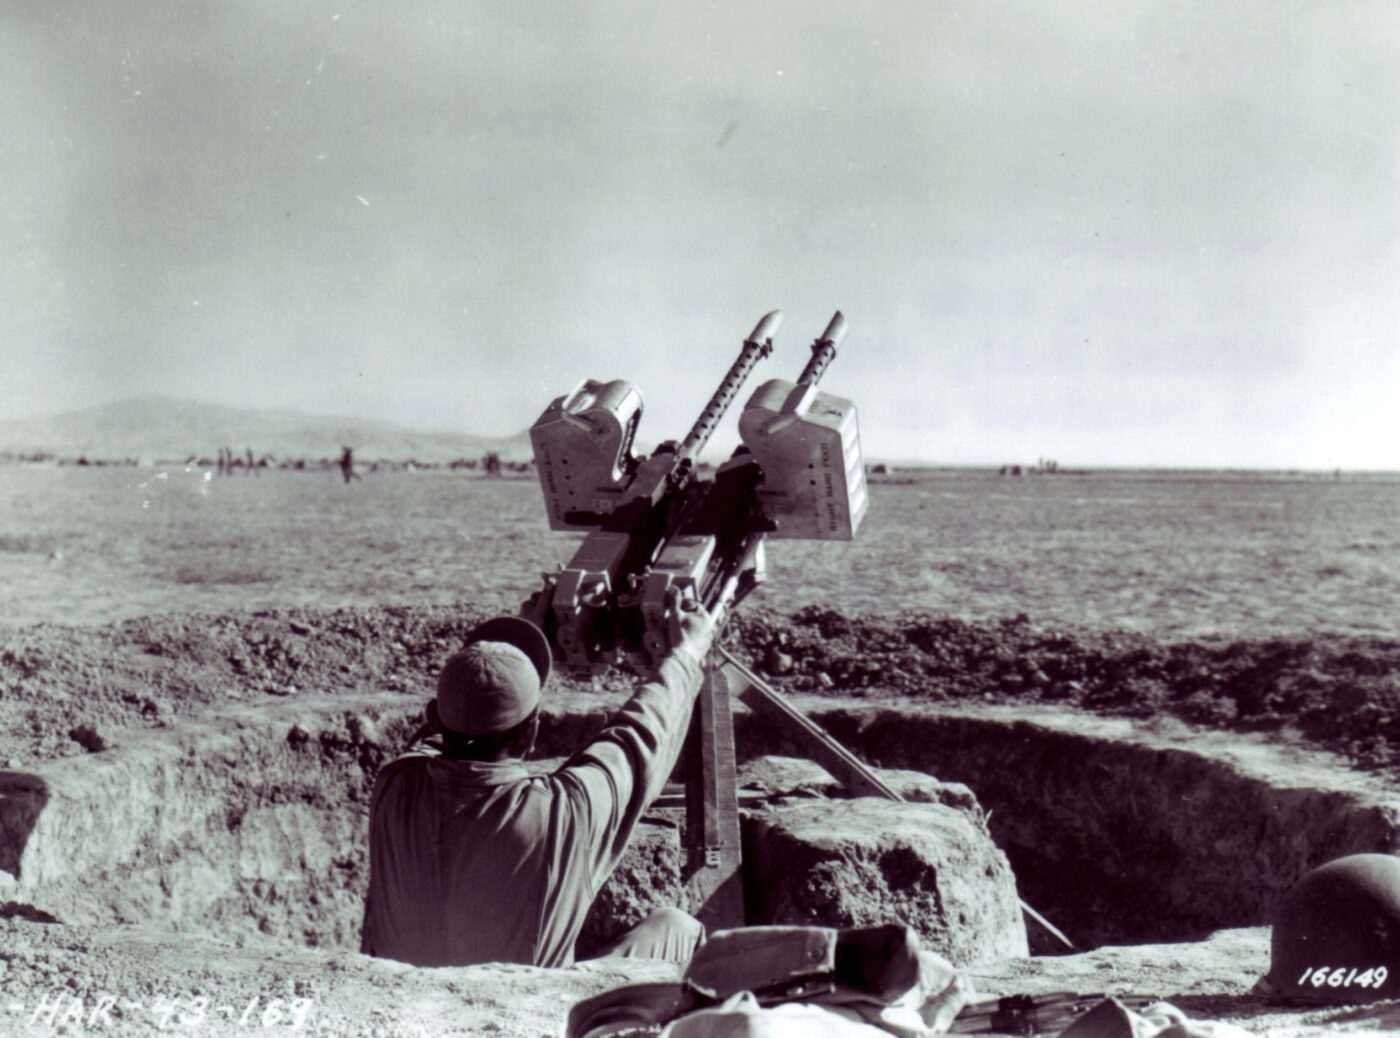 50 cal AAA improvised from B-17 tail guns in Biskra North Africa